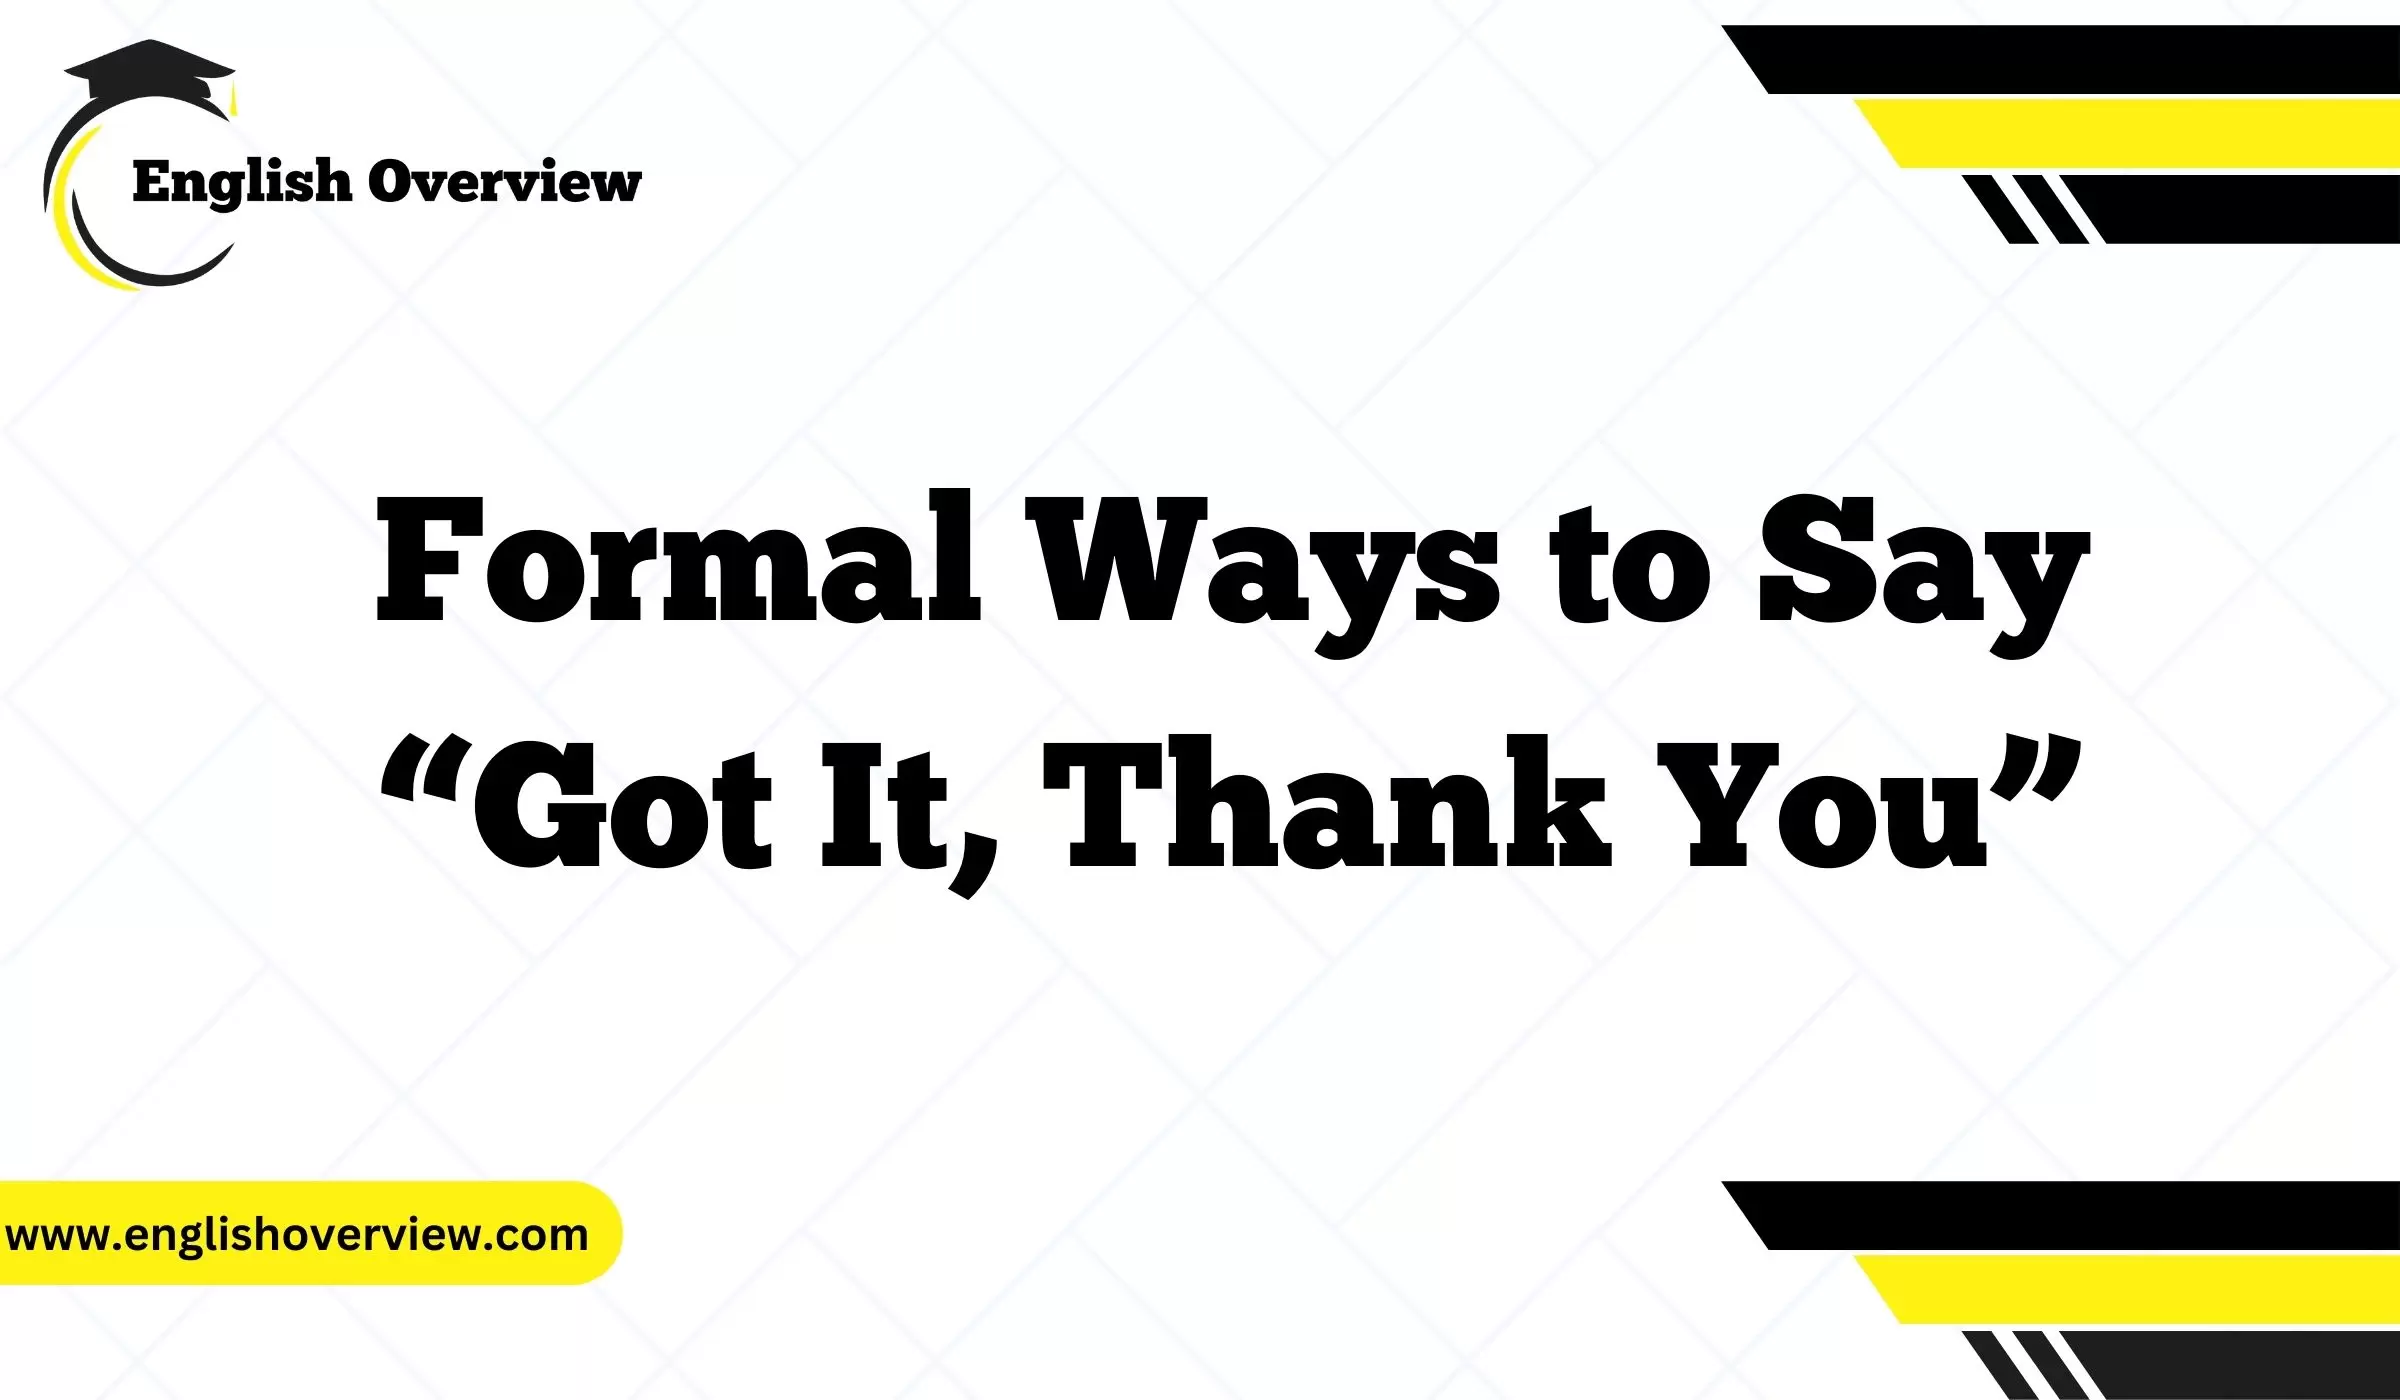 Formal Ways to Say “Got It, Thank You”